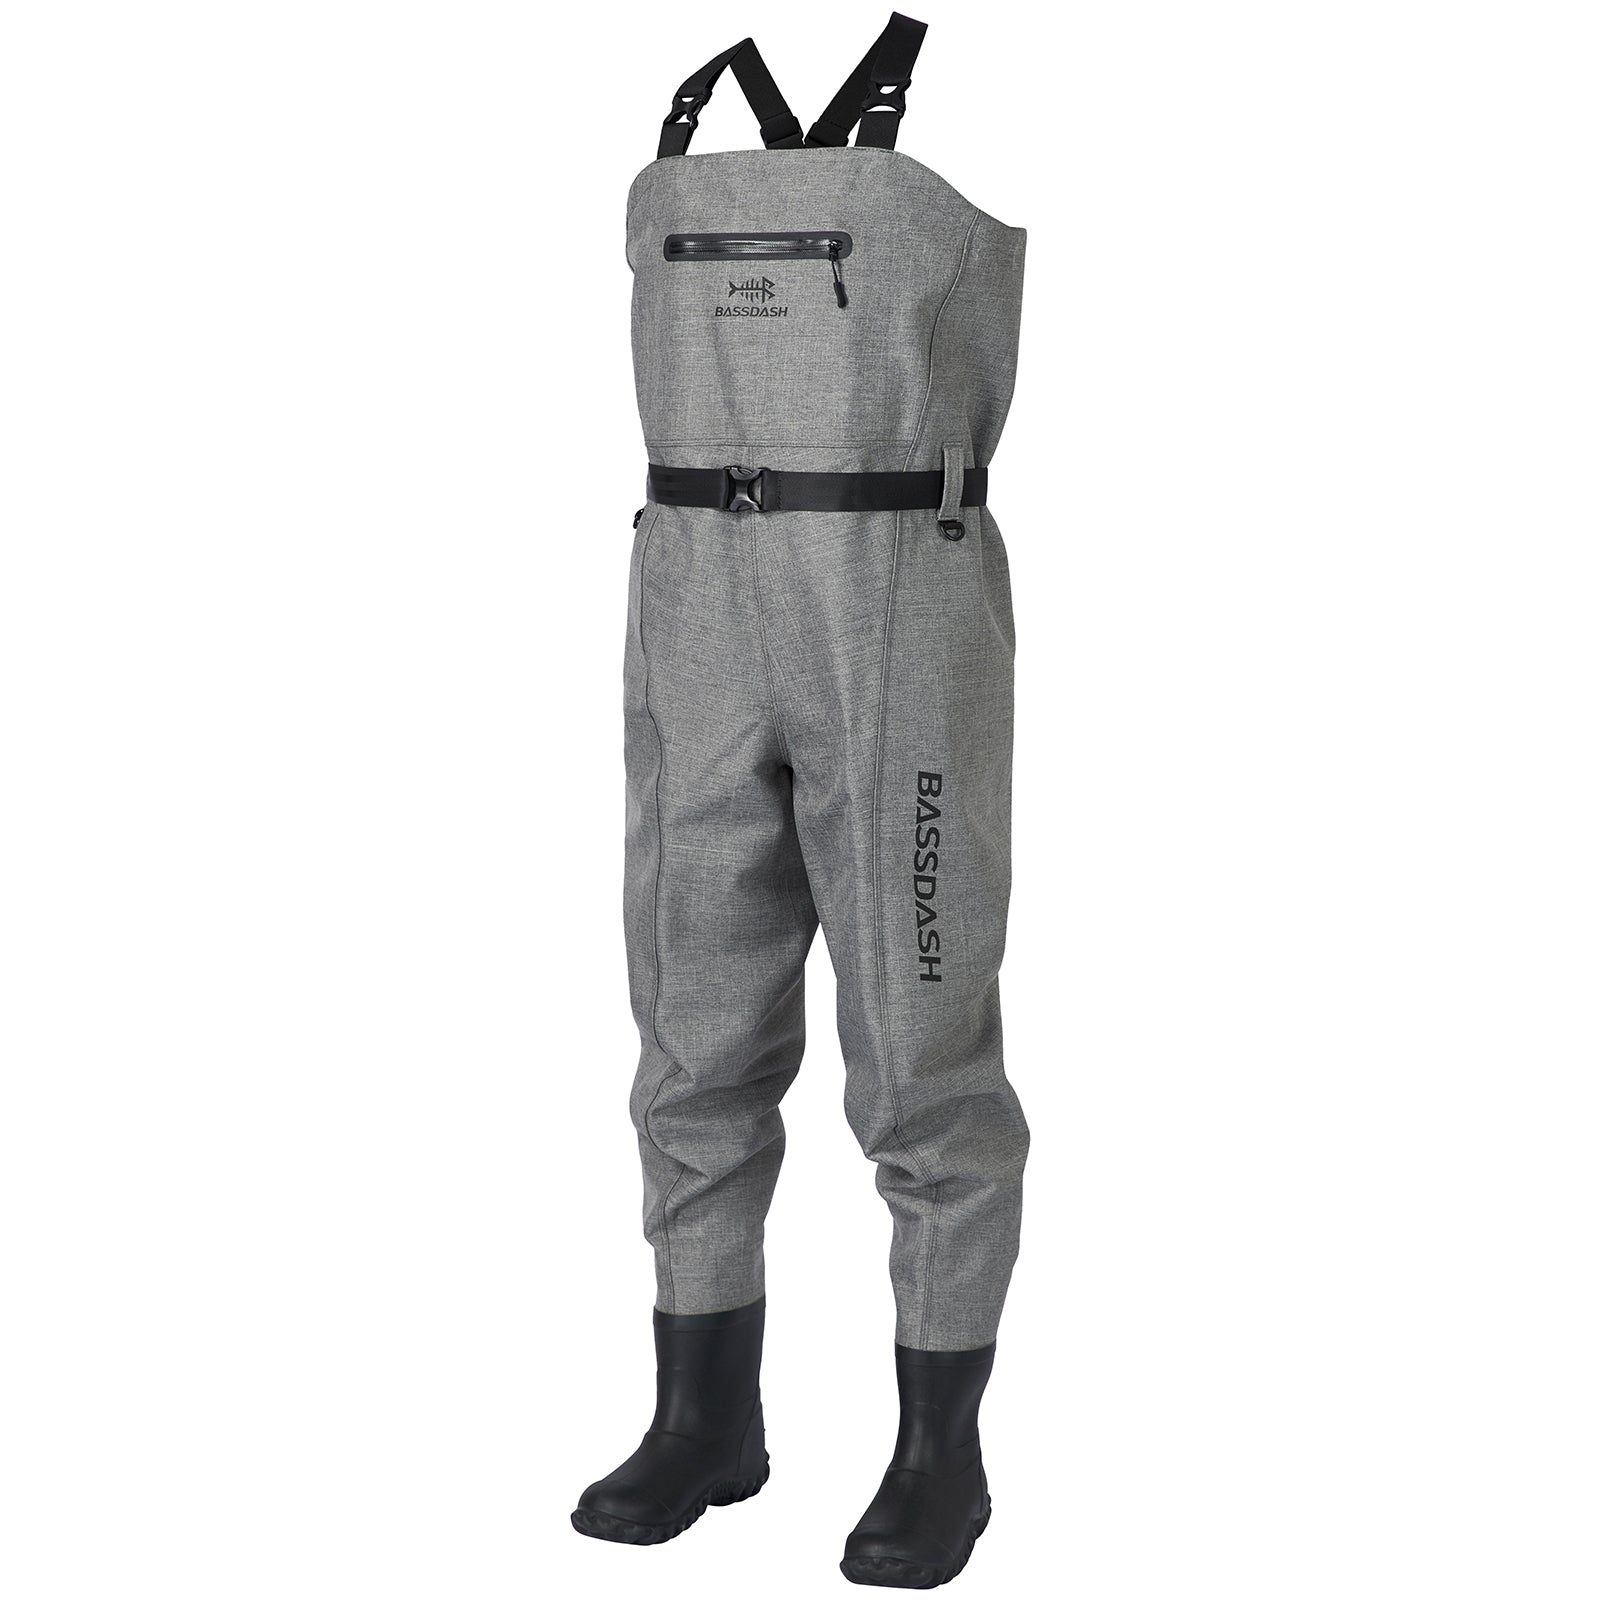 Fishing Chest Waders, Chest Wader Fishing Thick Waterproof